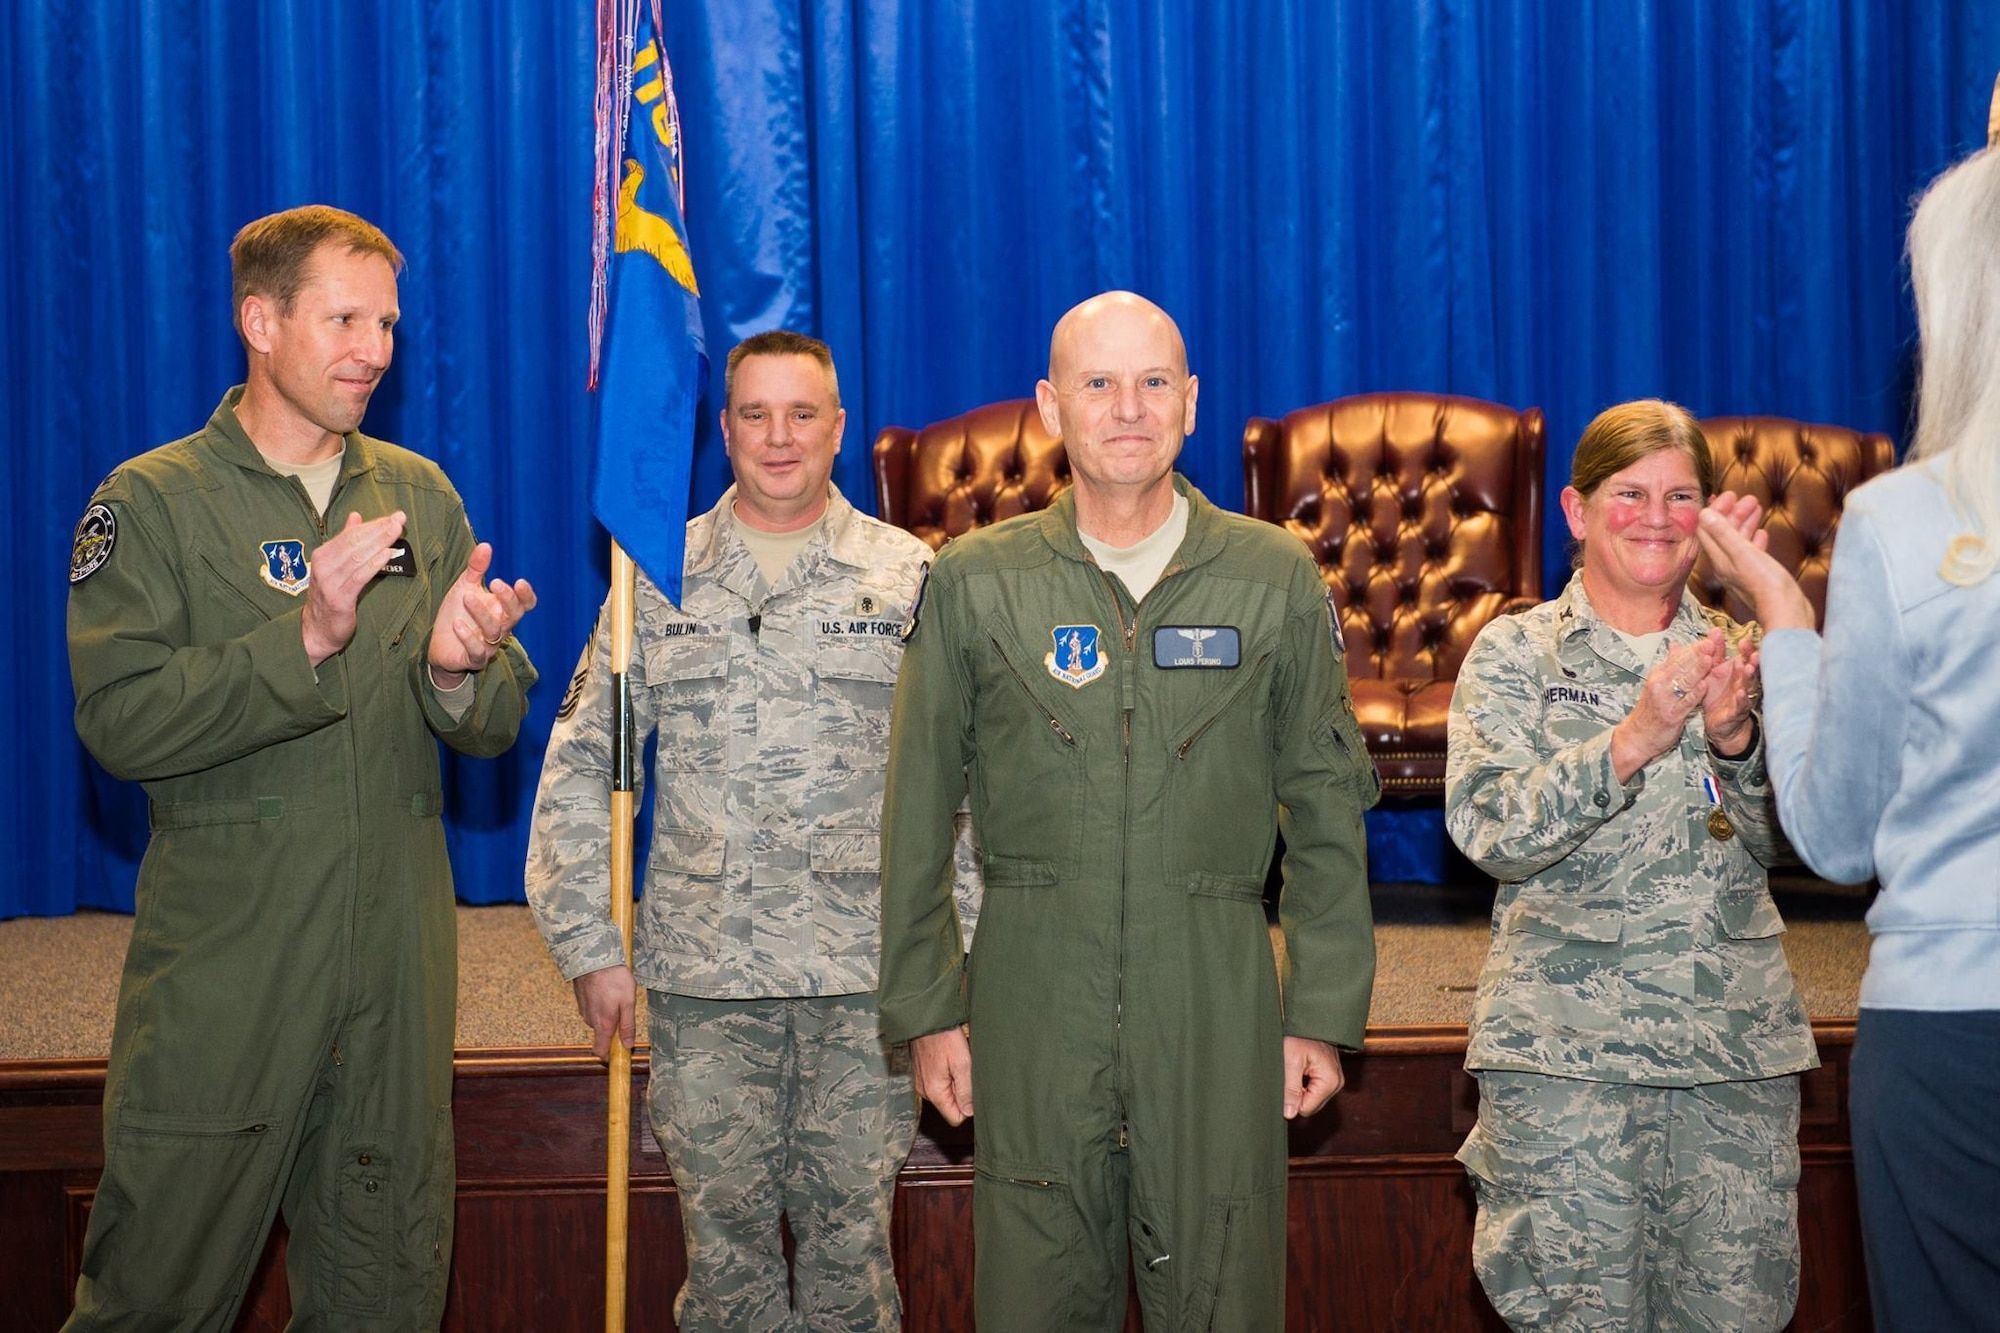 U.S. Air Force Col. Louis Perino, center, the commander of the 116th Medical Group, Georgia Air National Guard, stands at attention while Col. Mark Weber, the commander of the 116th Air Control Wing, left and Col. Muriel Herman, former commander of the 116th Medical Group, applaud after Perino took command of the 116th Medical Group during a ceremony at Robins Air Force Base, Ga., Jan. 10, 2016. A board certified emergency medicine physician, Perino replaced Herman who commanded the group for more than six years. Perino is also the Chief of Aerospace Medicine and the Deputy State Air Surgeon for the Georgia Air National Guard and brings 23 years of Air National Guard and a wealth of civilian experience to the position. (U.S. Air National Guard photo by Senior Master Sgt. Roger Parsons)